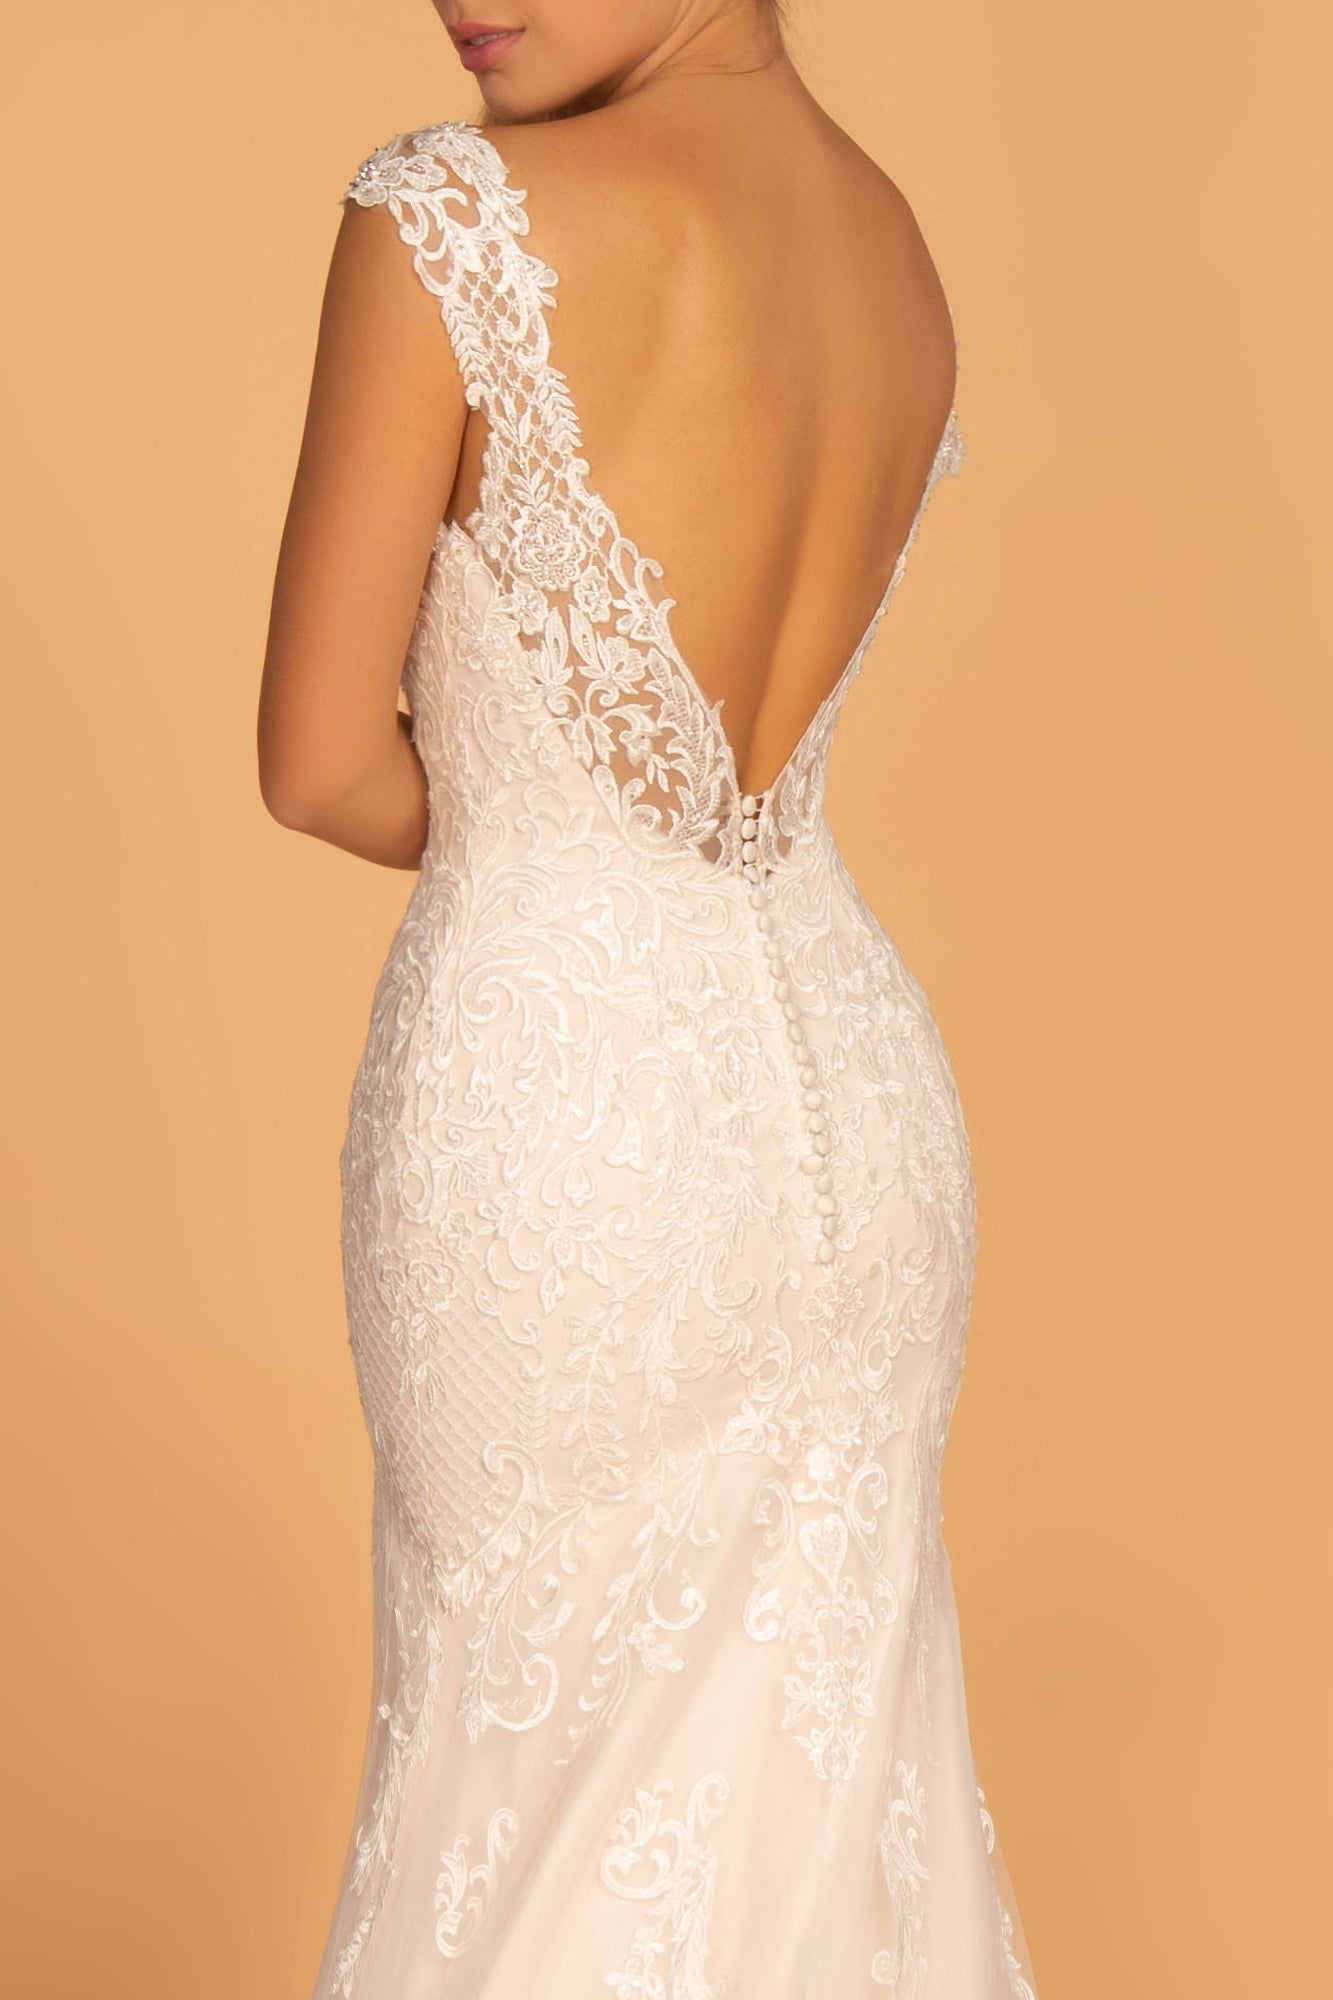 Embroidery Embellished Mesh Wedding Gown Netting Shoulder Strap GLGL2595 Elsy Style WEDDING GOWNS